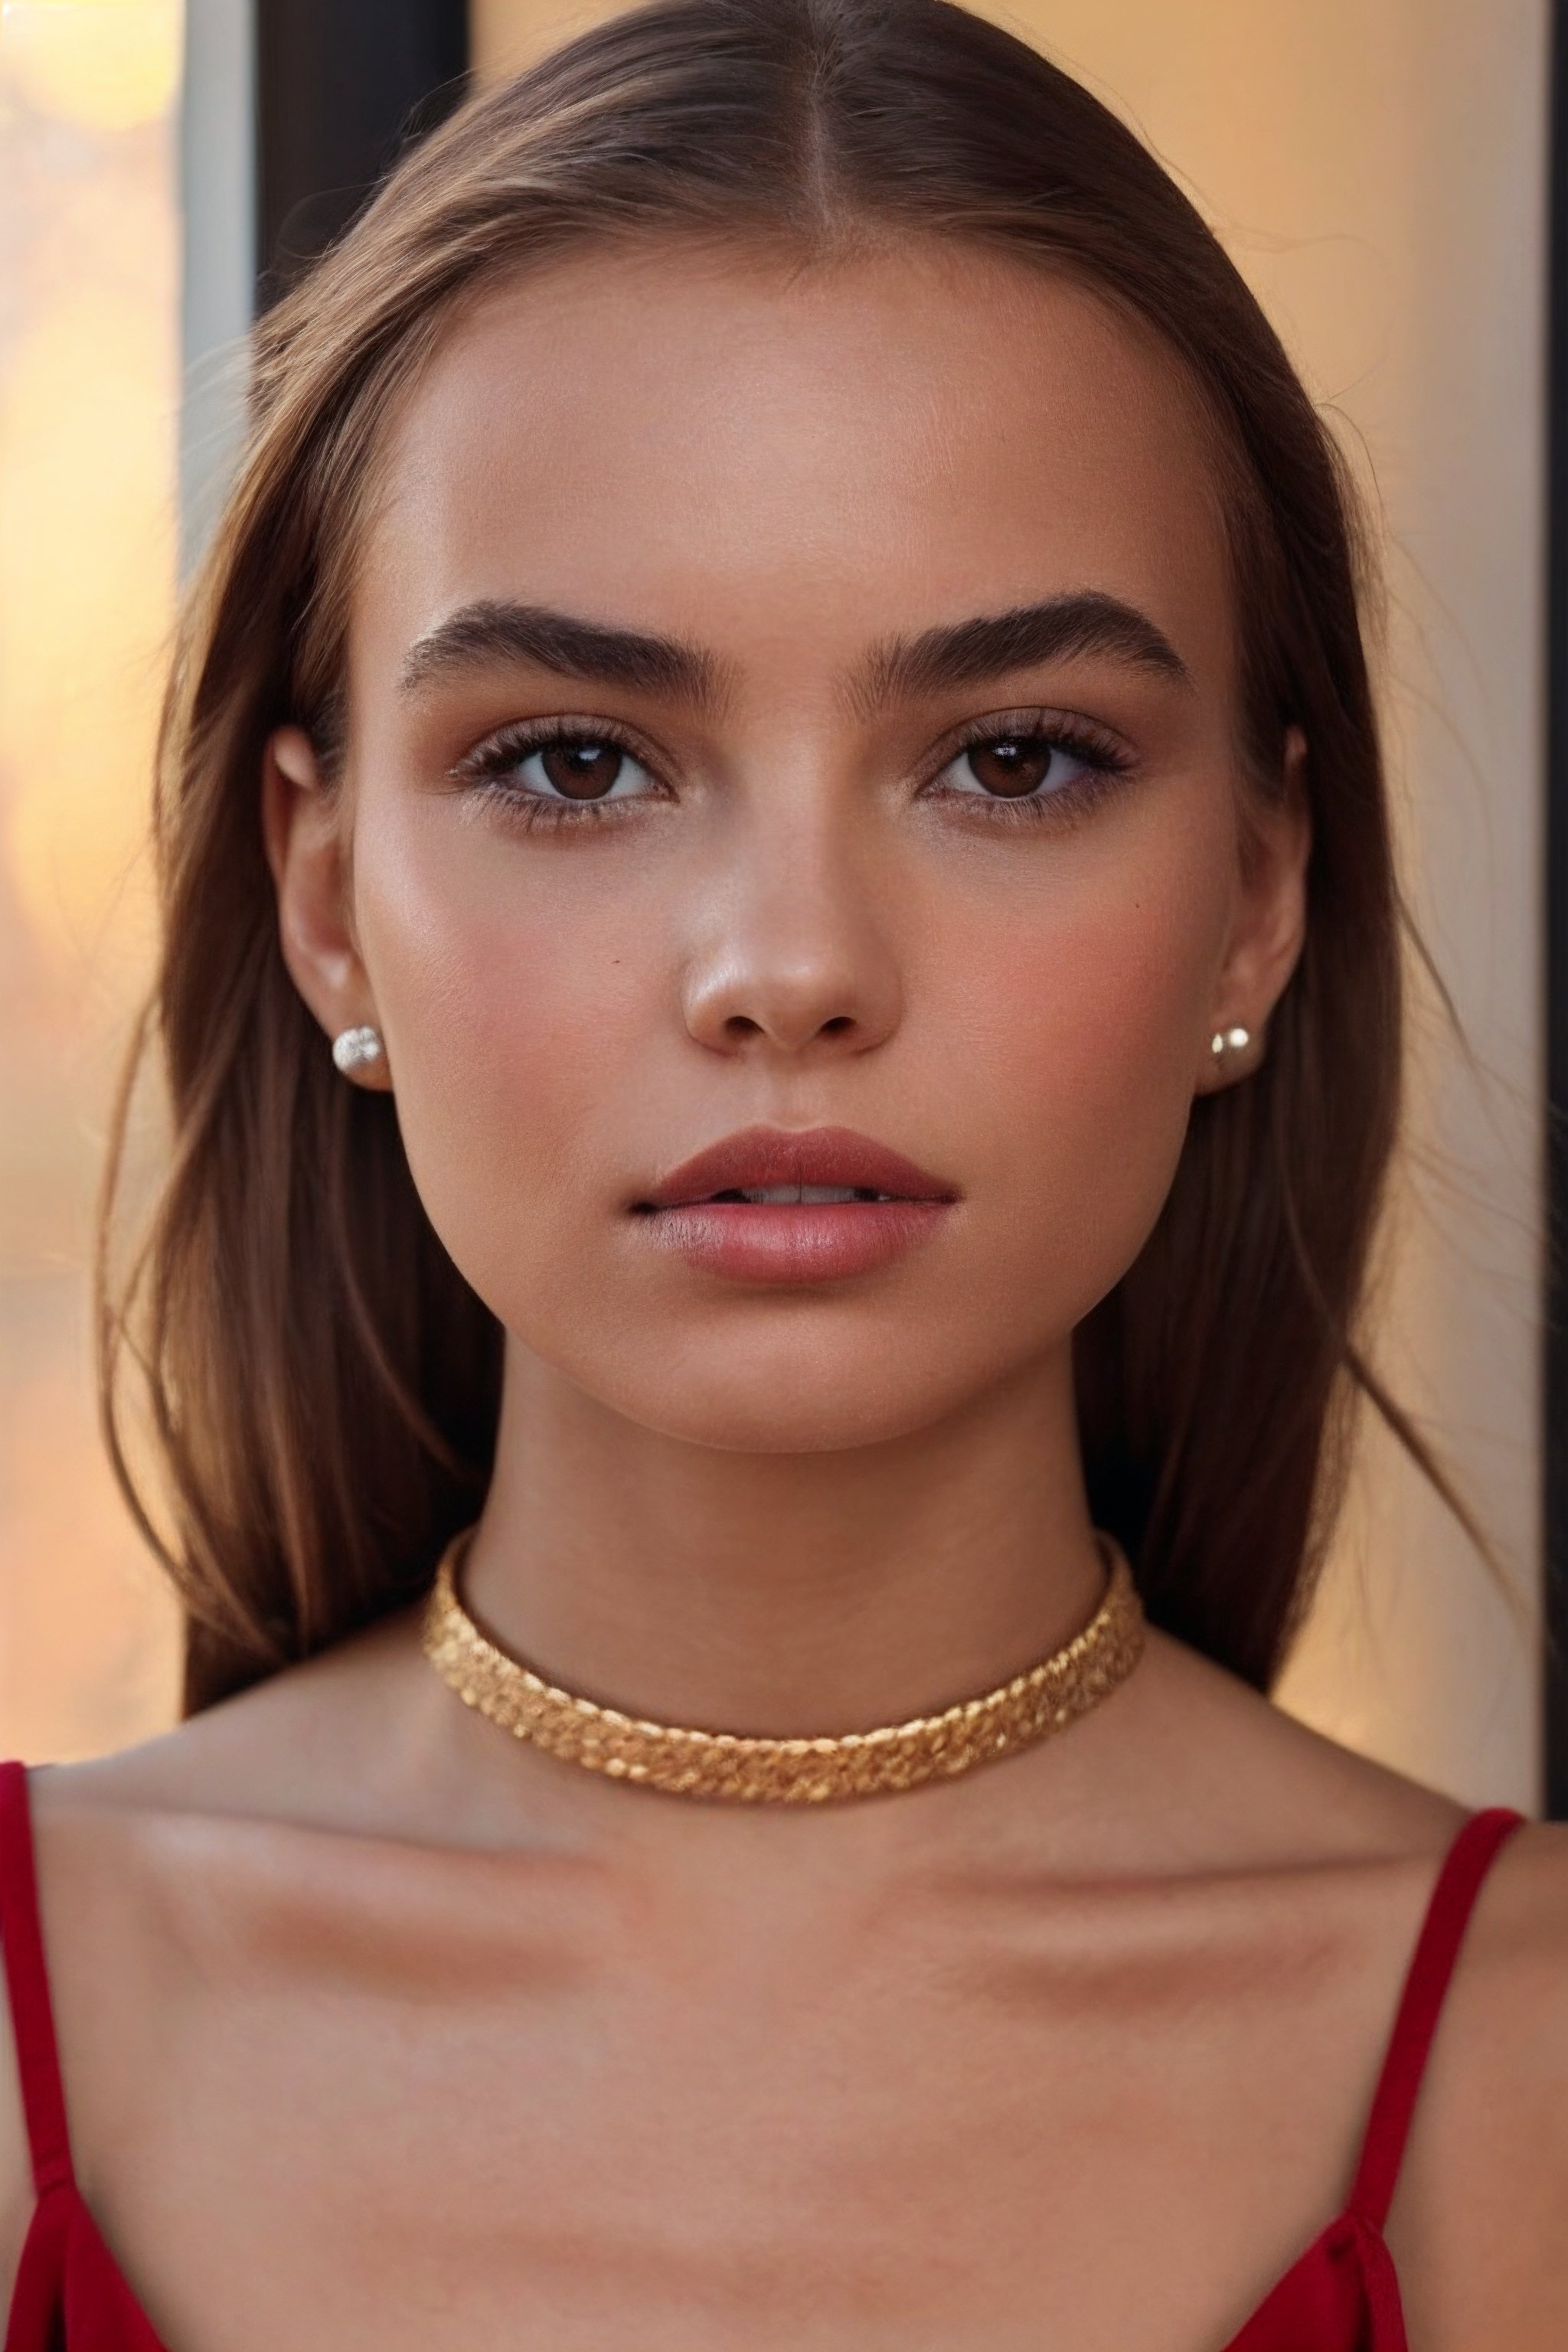 igirl, beautiful 22 year old woman, close up, portrait, black choker, looking slightly away from camera,  dimly lit, sitting in a room by a window, bathed in golden sunlight, dark walls, stud earrings, women's watch,  best quality, amazing quality, very aesthetic, (petite), insanely detailed eyes, insanely detailed face, insanely detaled lips, insanely detailed hands, insanely detailed hair,  insanely detailed skin, long brown hair, brown eyes, red lipstick